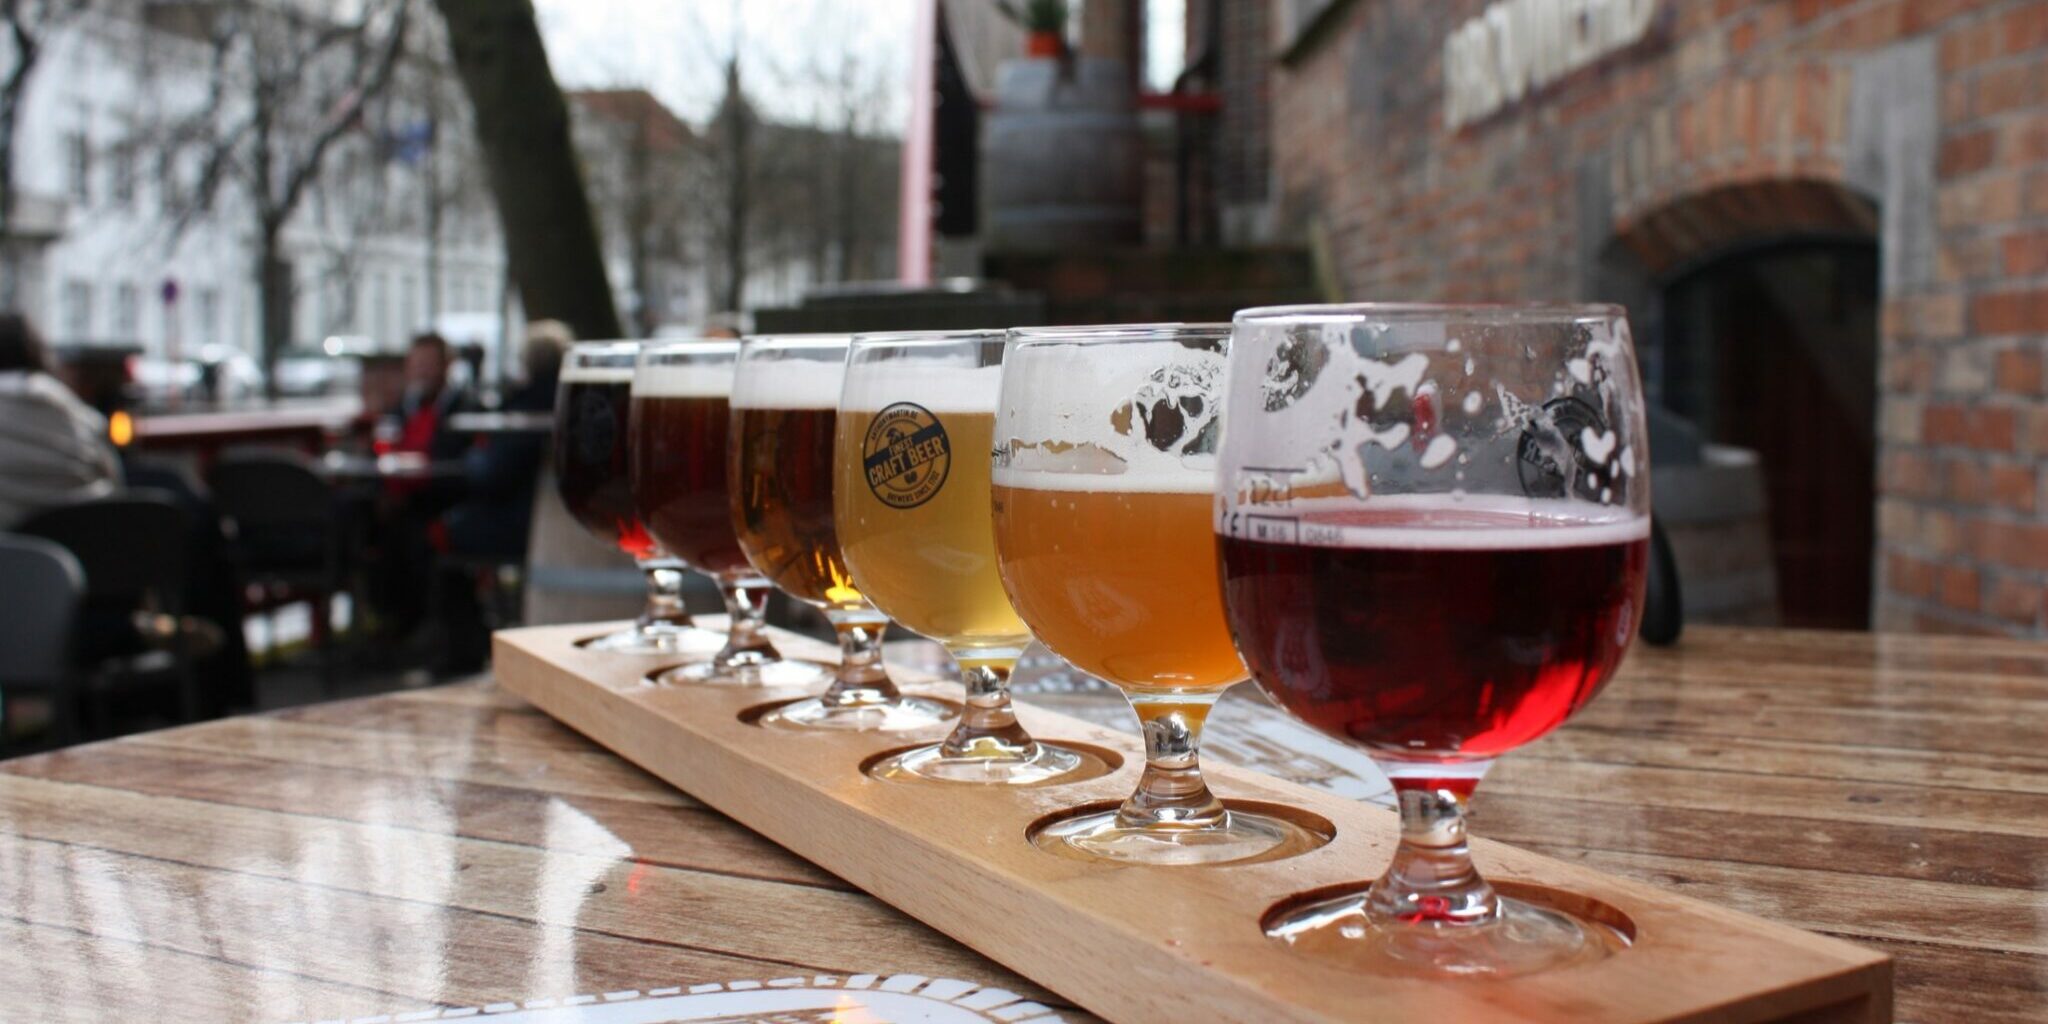 A flight of craft beers served outdoors